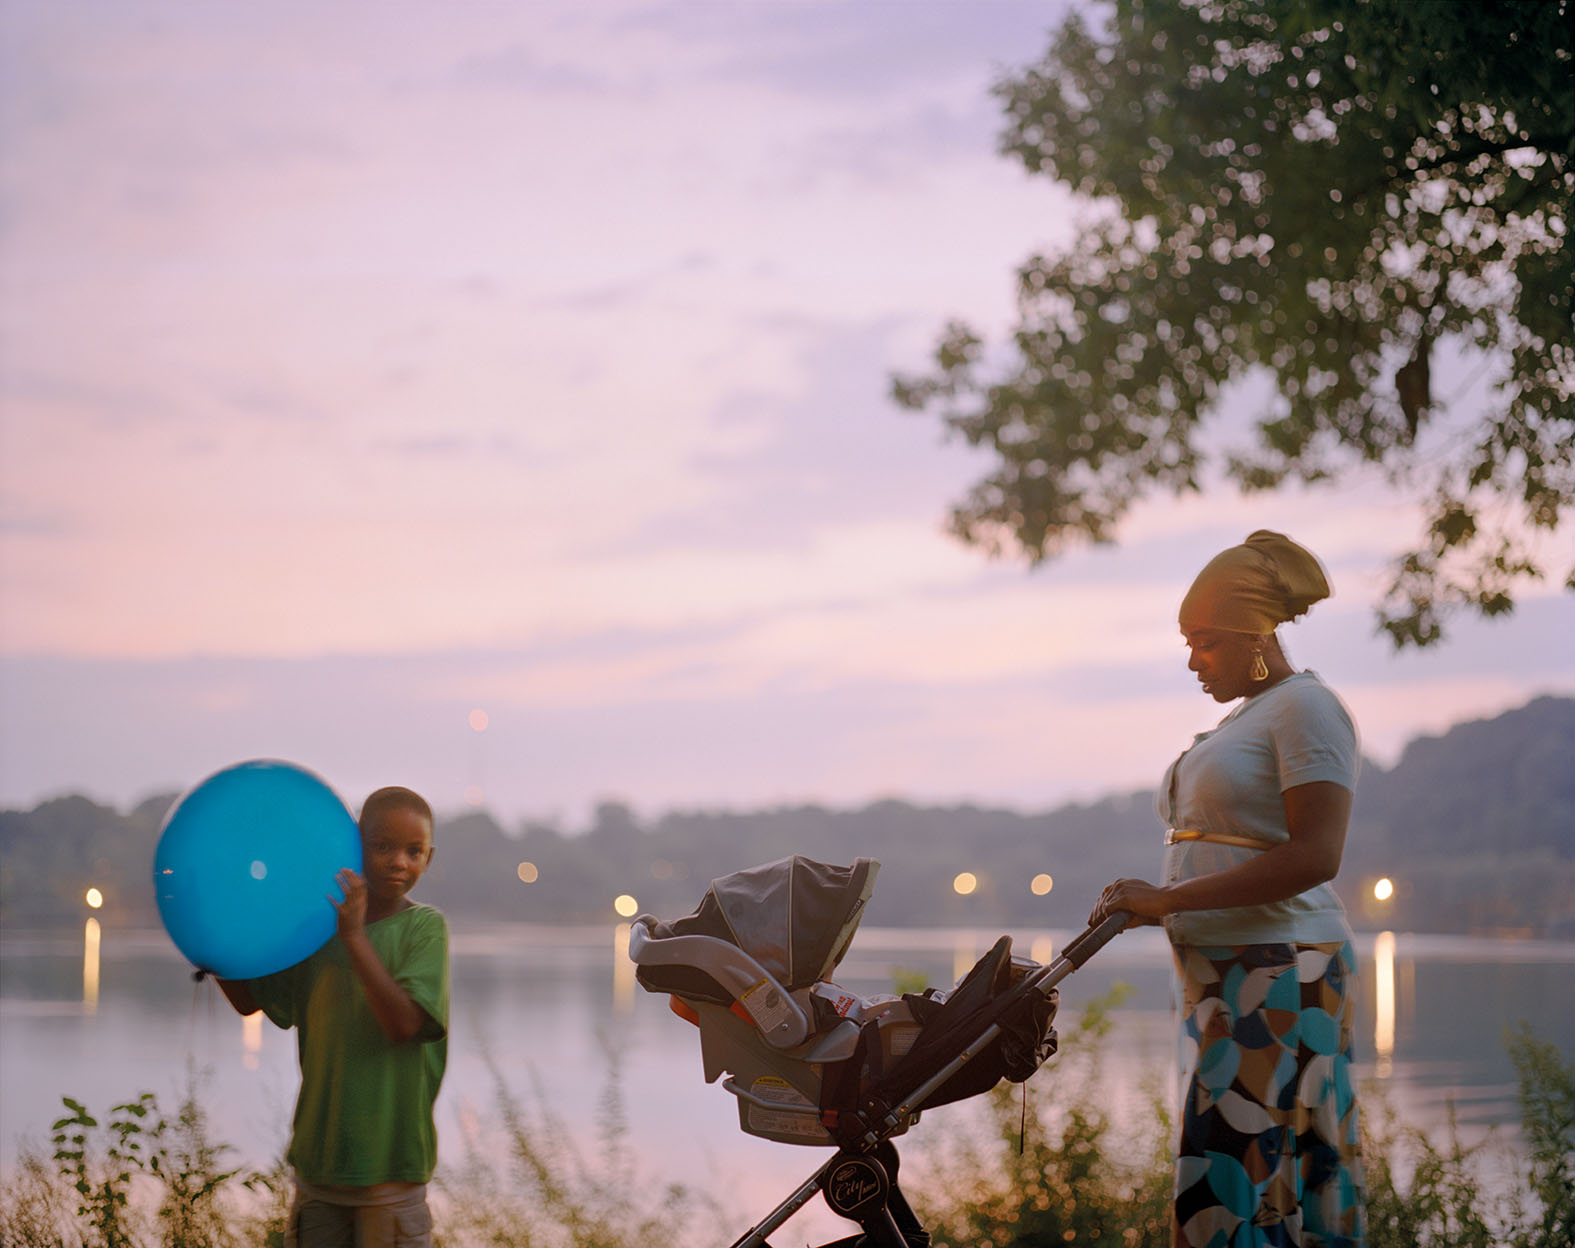 Color photograph of a woman pushing a stroller in front of a sunset sky over a body of water. To her right is a young boy holding blue ball; lights from the opposite bank are reflected in the water. 